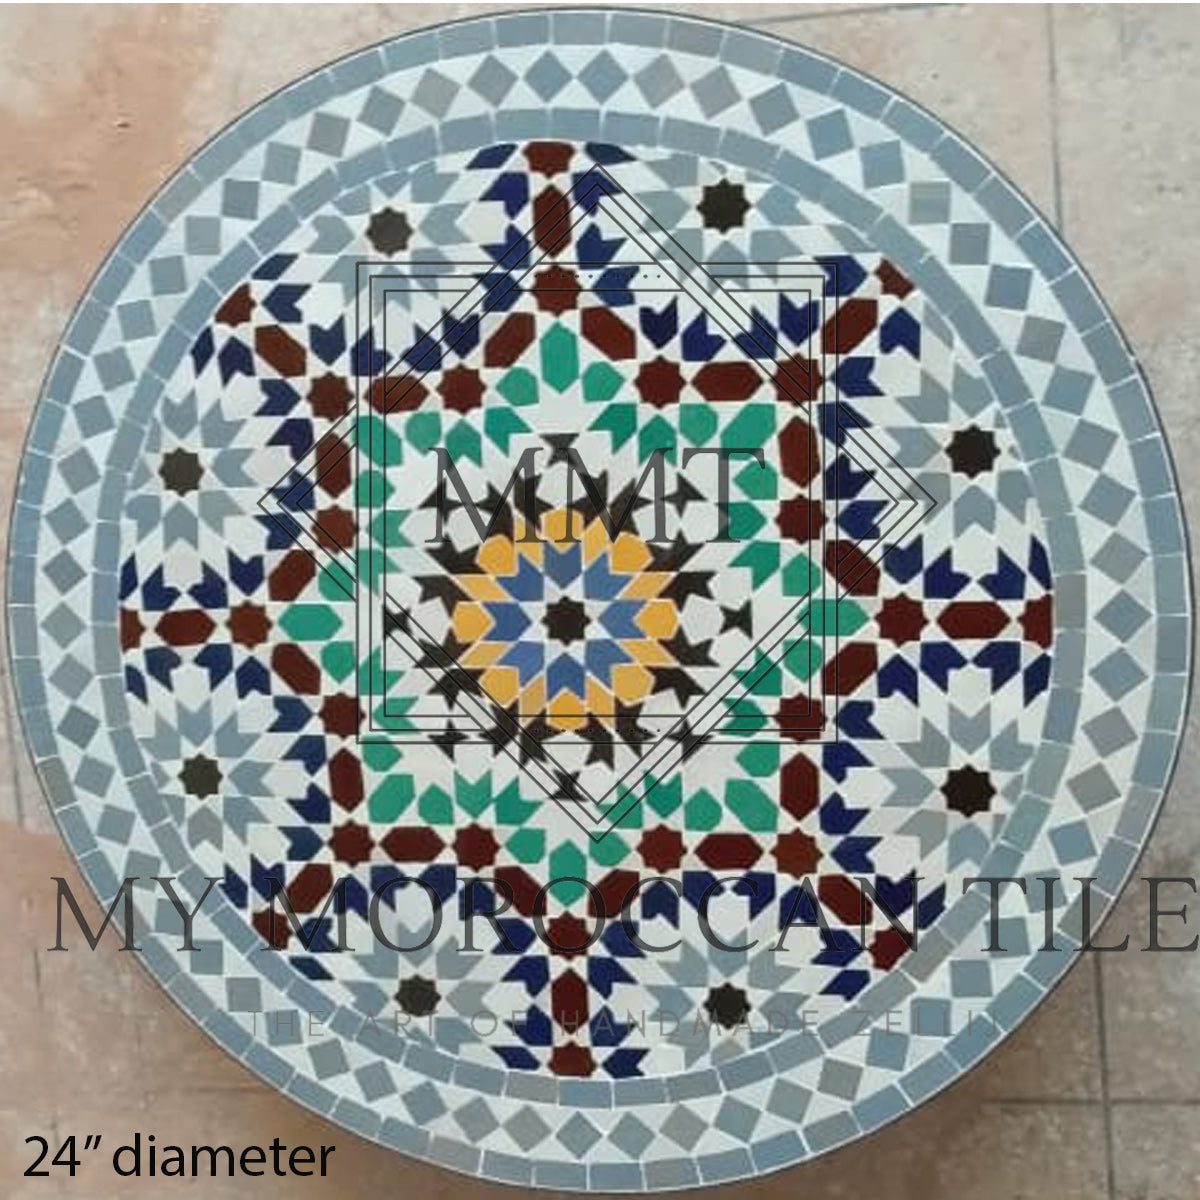 MOROCCAN MOSAIC TABLE 1907